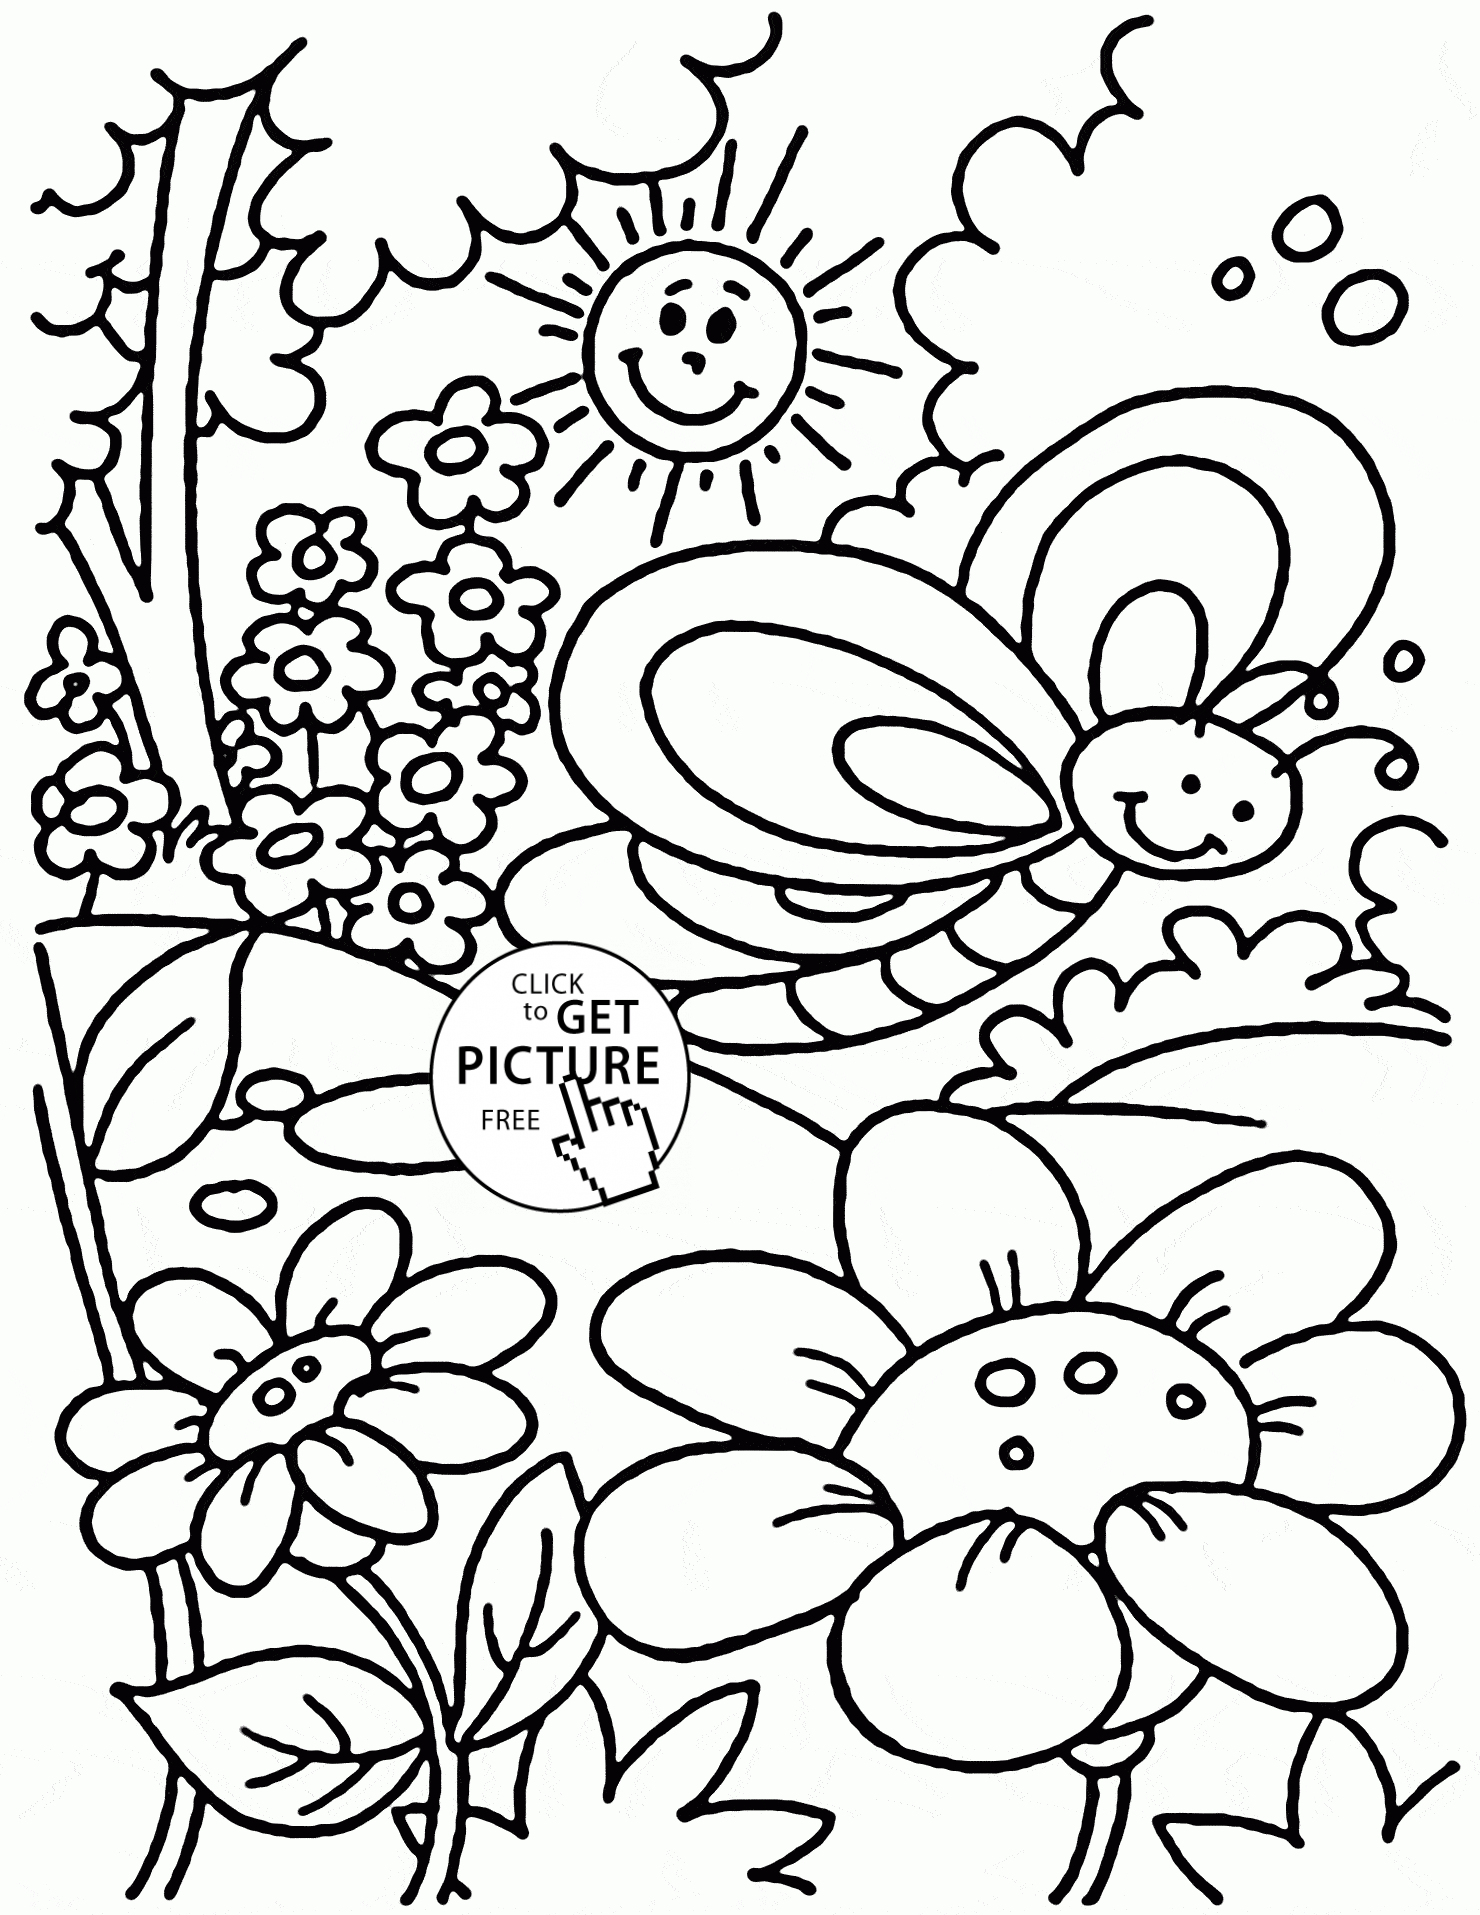 Coloring Pages Free For Kids Spring Time   Coloring Home